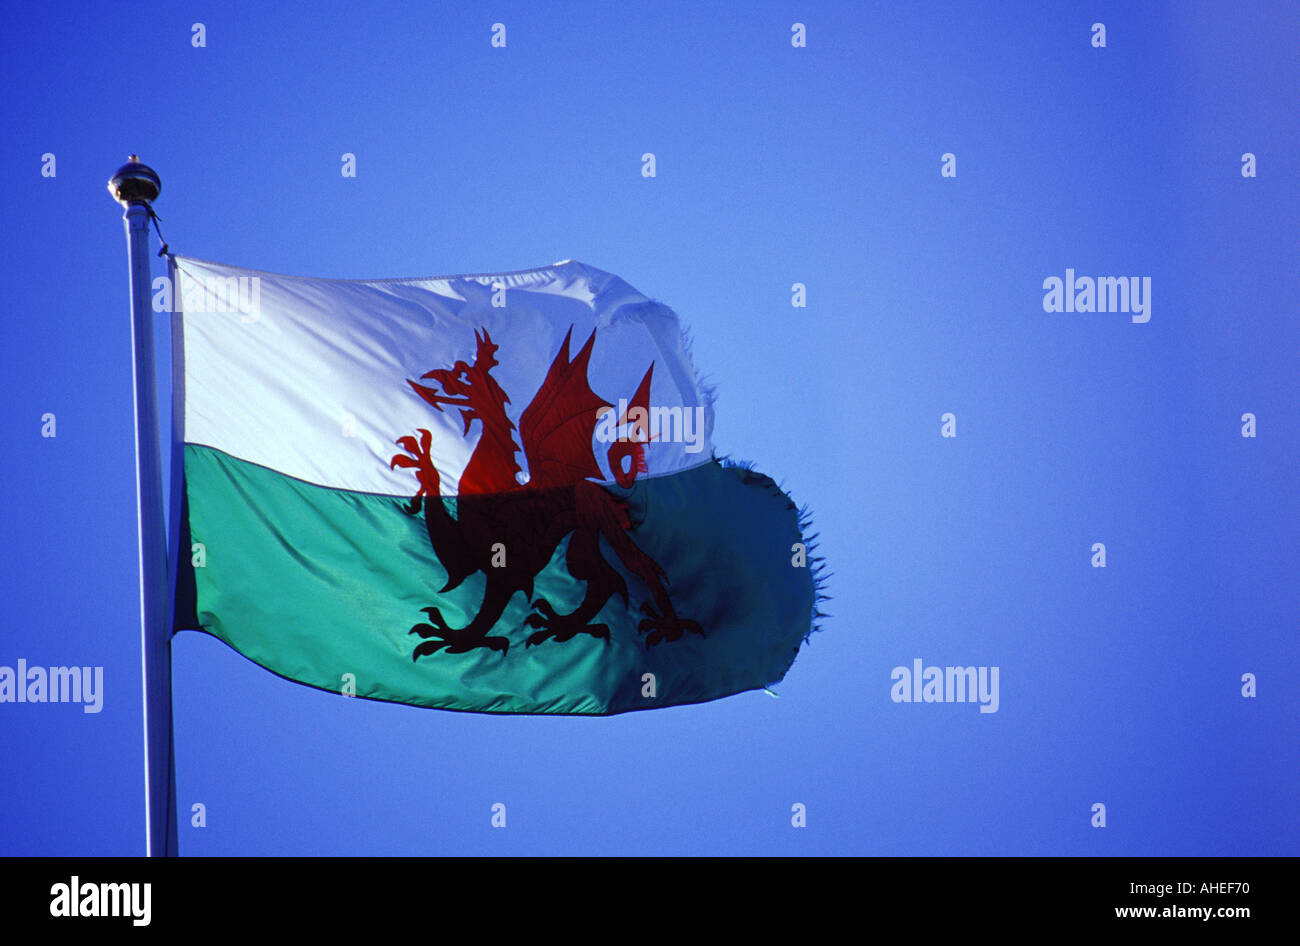 THE WELSH FLAG FLYING IN THE BREEZE AGAINST A BLUE SKY ON A SUNNY DAY Stock Photo